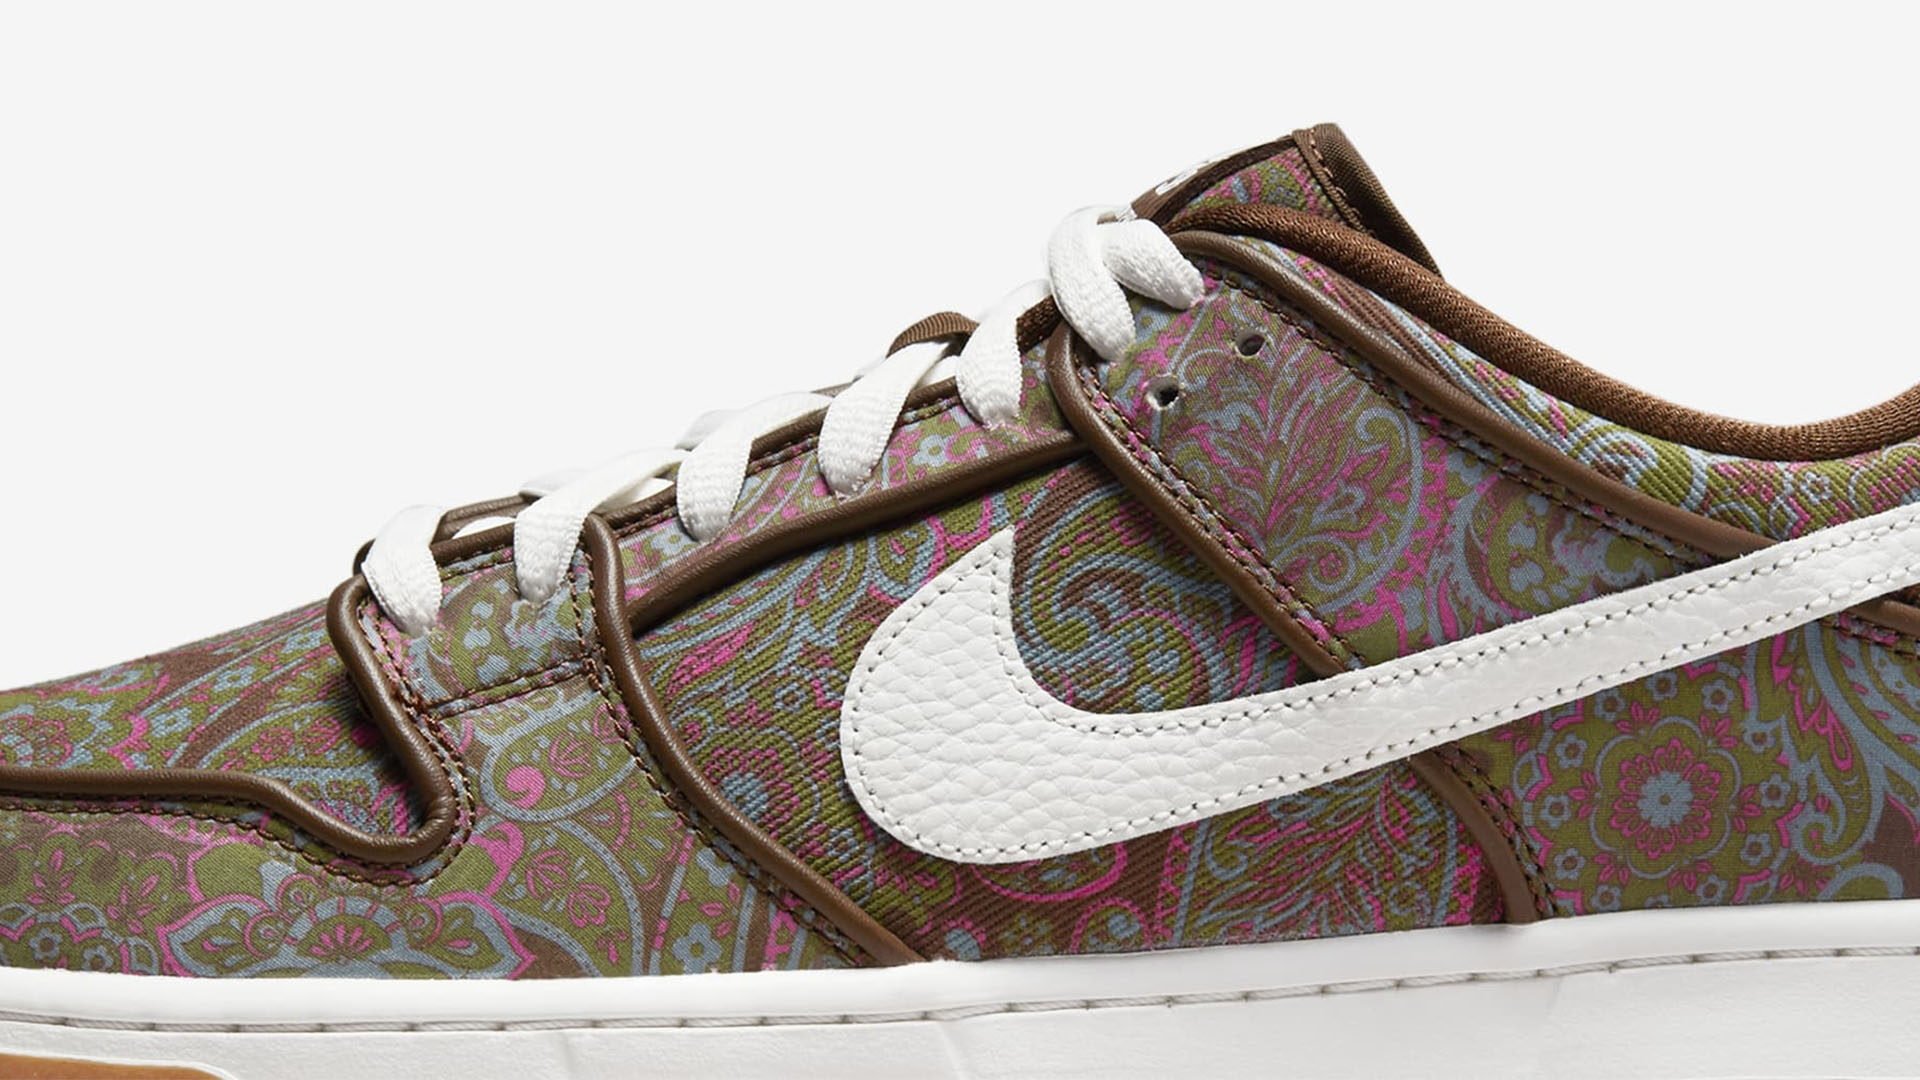 SB DUNK LOW 'Paisley' ｜ FLY BASKETBALL CULTURE MAGAZINE ...